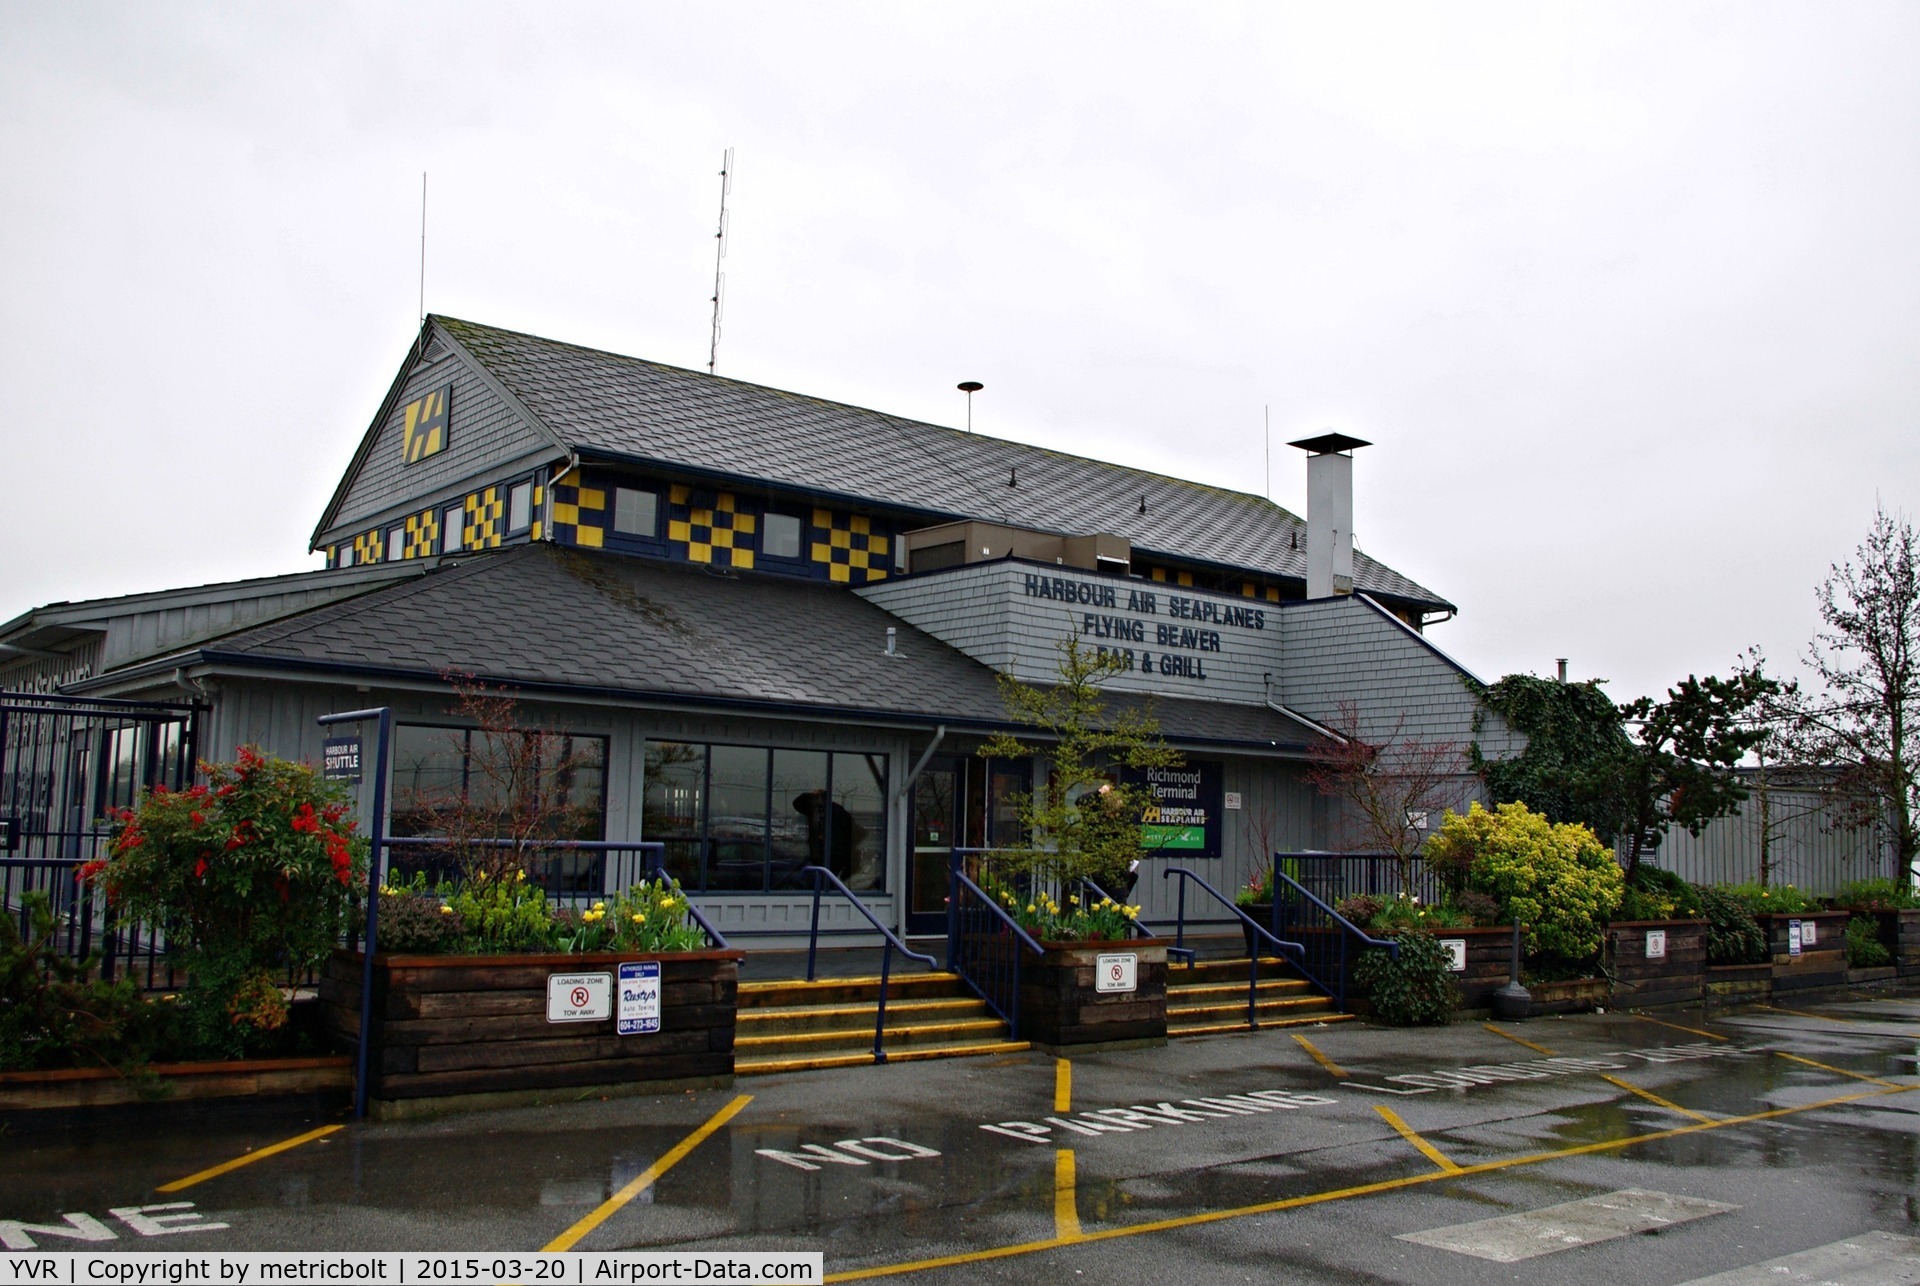 Vancouver International Airport, Vancouver, British Columbia Canada (YVR) - Harbour Air Terminal,with Flying Beaver Bar and Grill